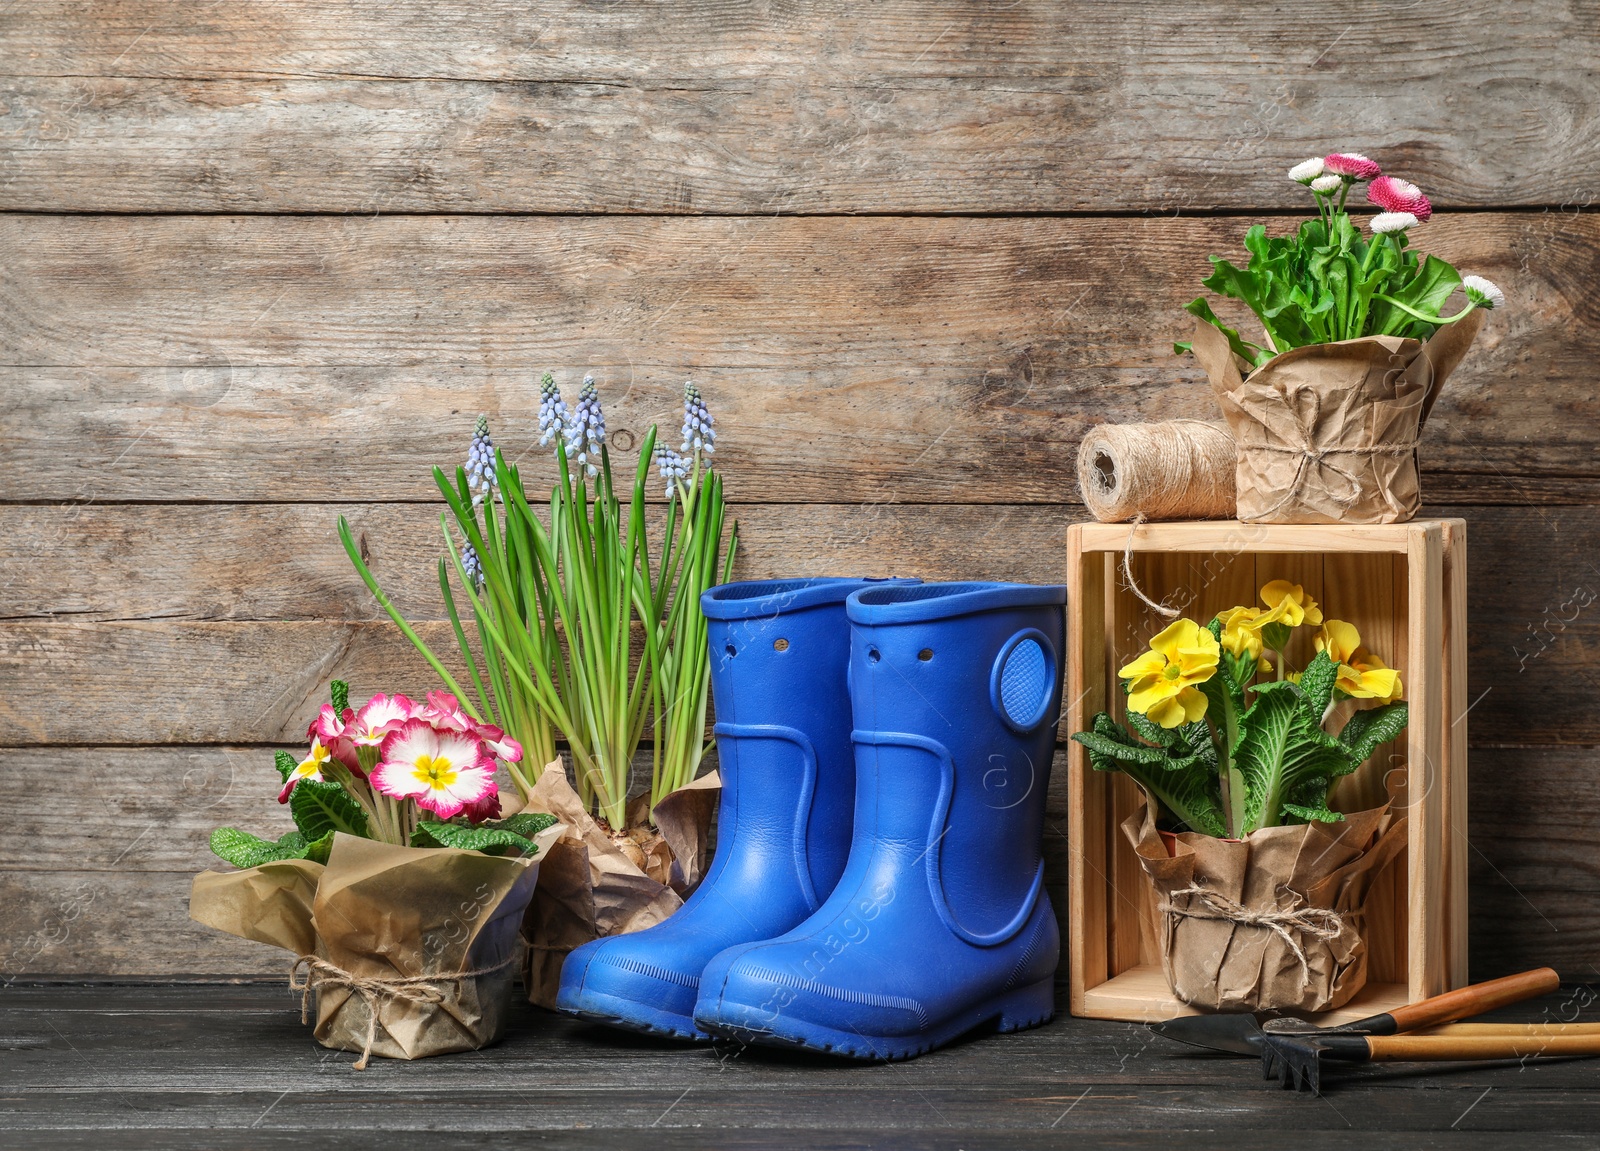 Photo of Composition with plants and gardening tools on table against wooden background